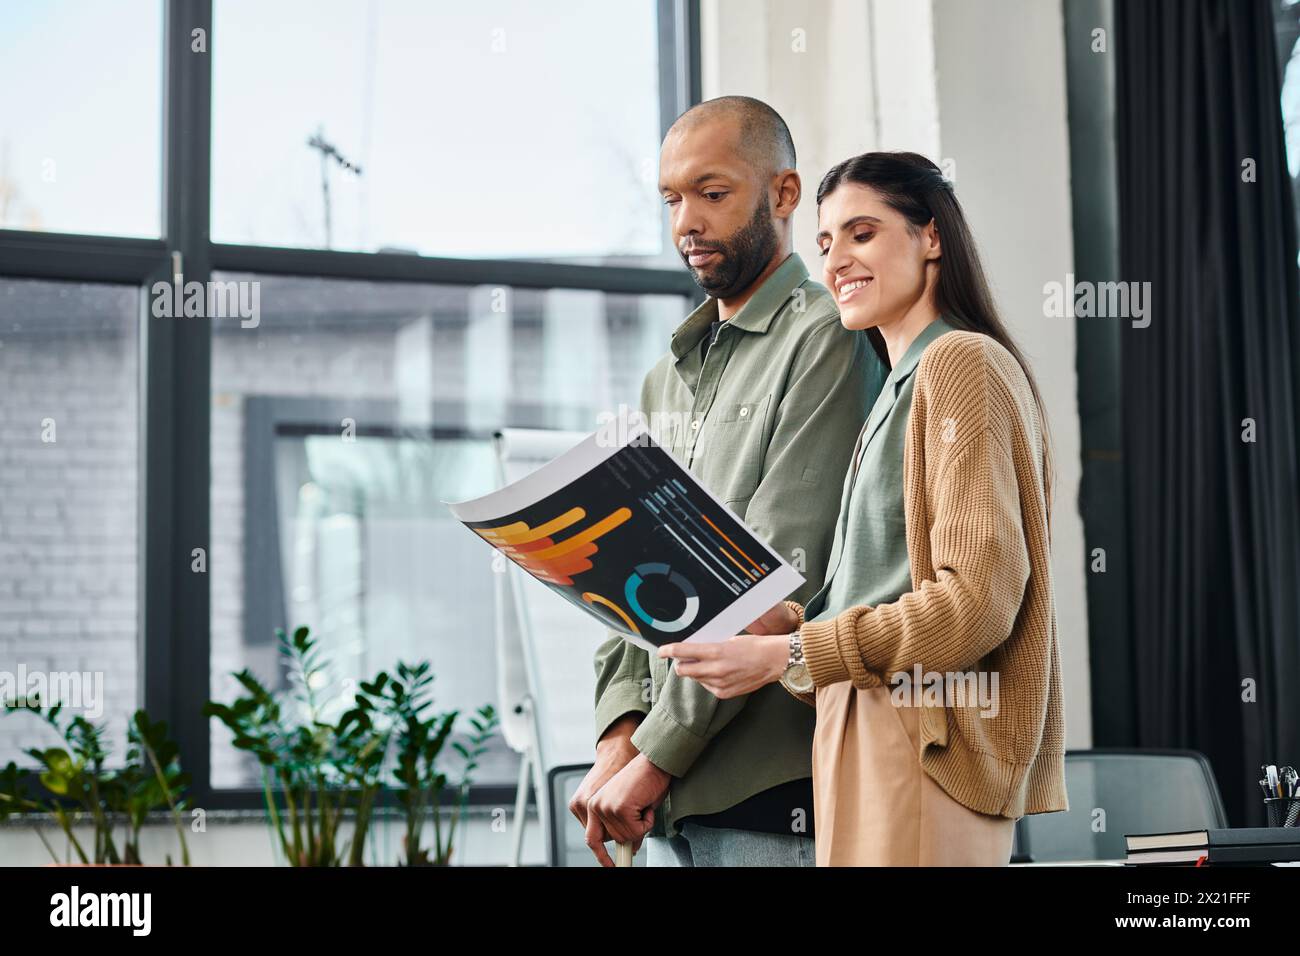 A man and a woman engrossed in charts, exploring ideas in a shared moment of intellectual connection. Stock Photo